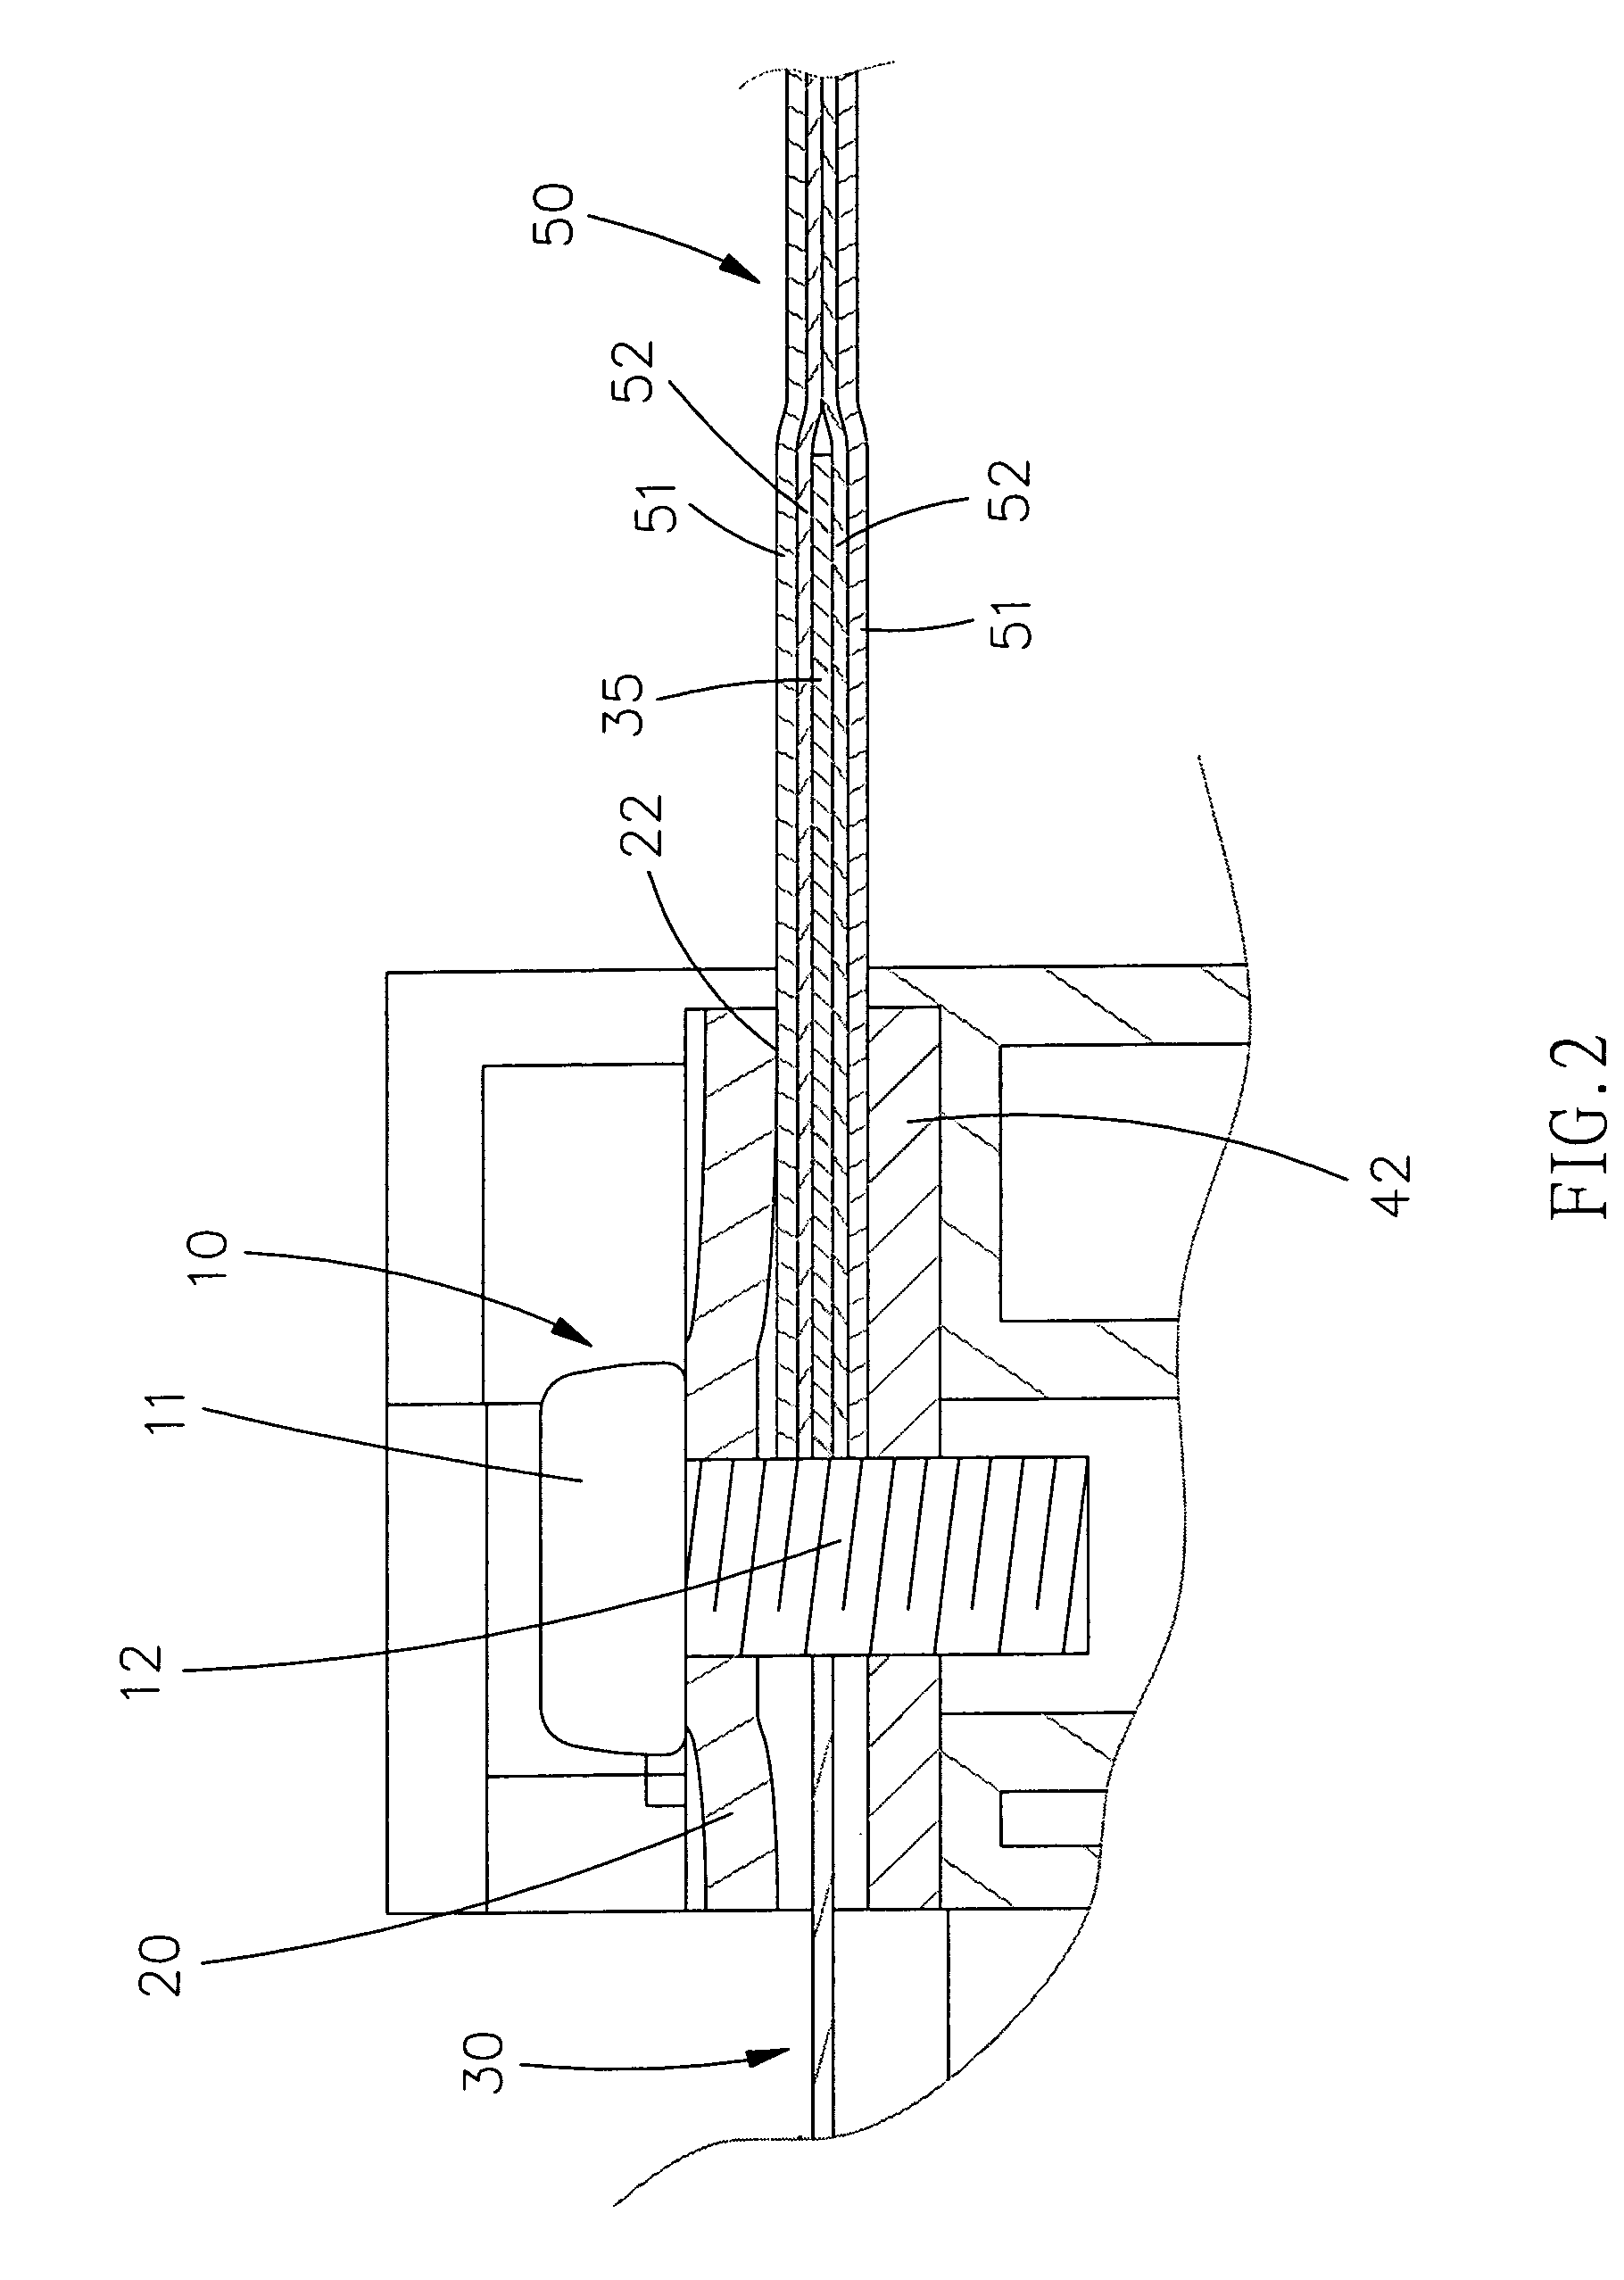 Connection device for signal wire